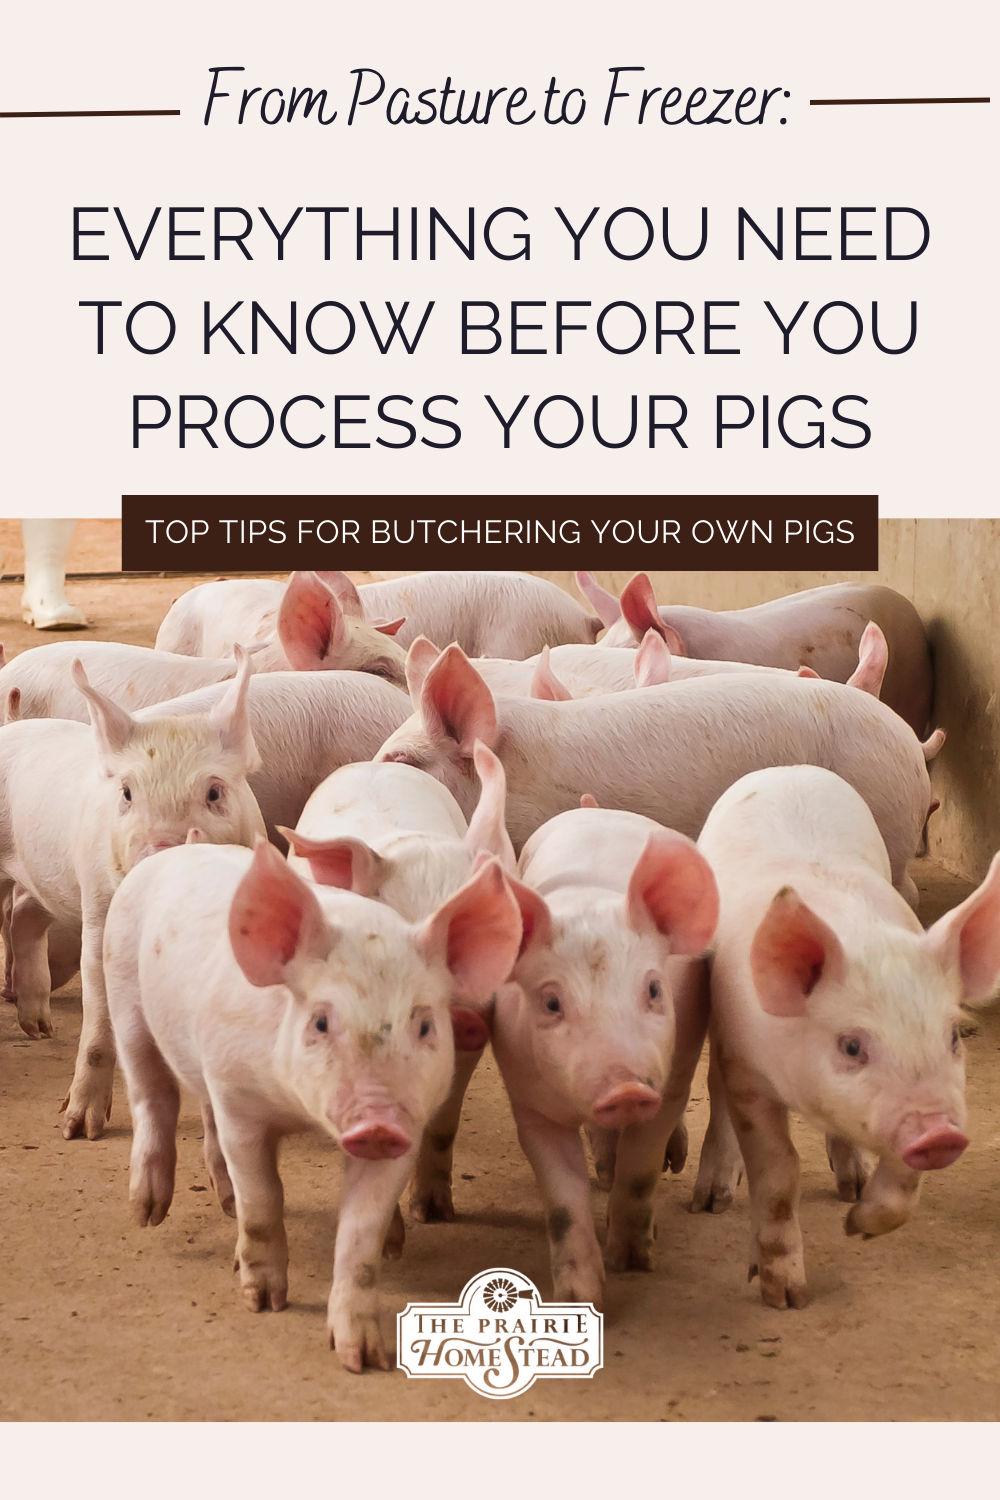 What You Need to Know Before You Process Your Home-Raised Pigs